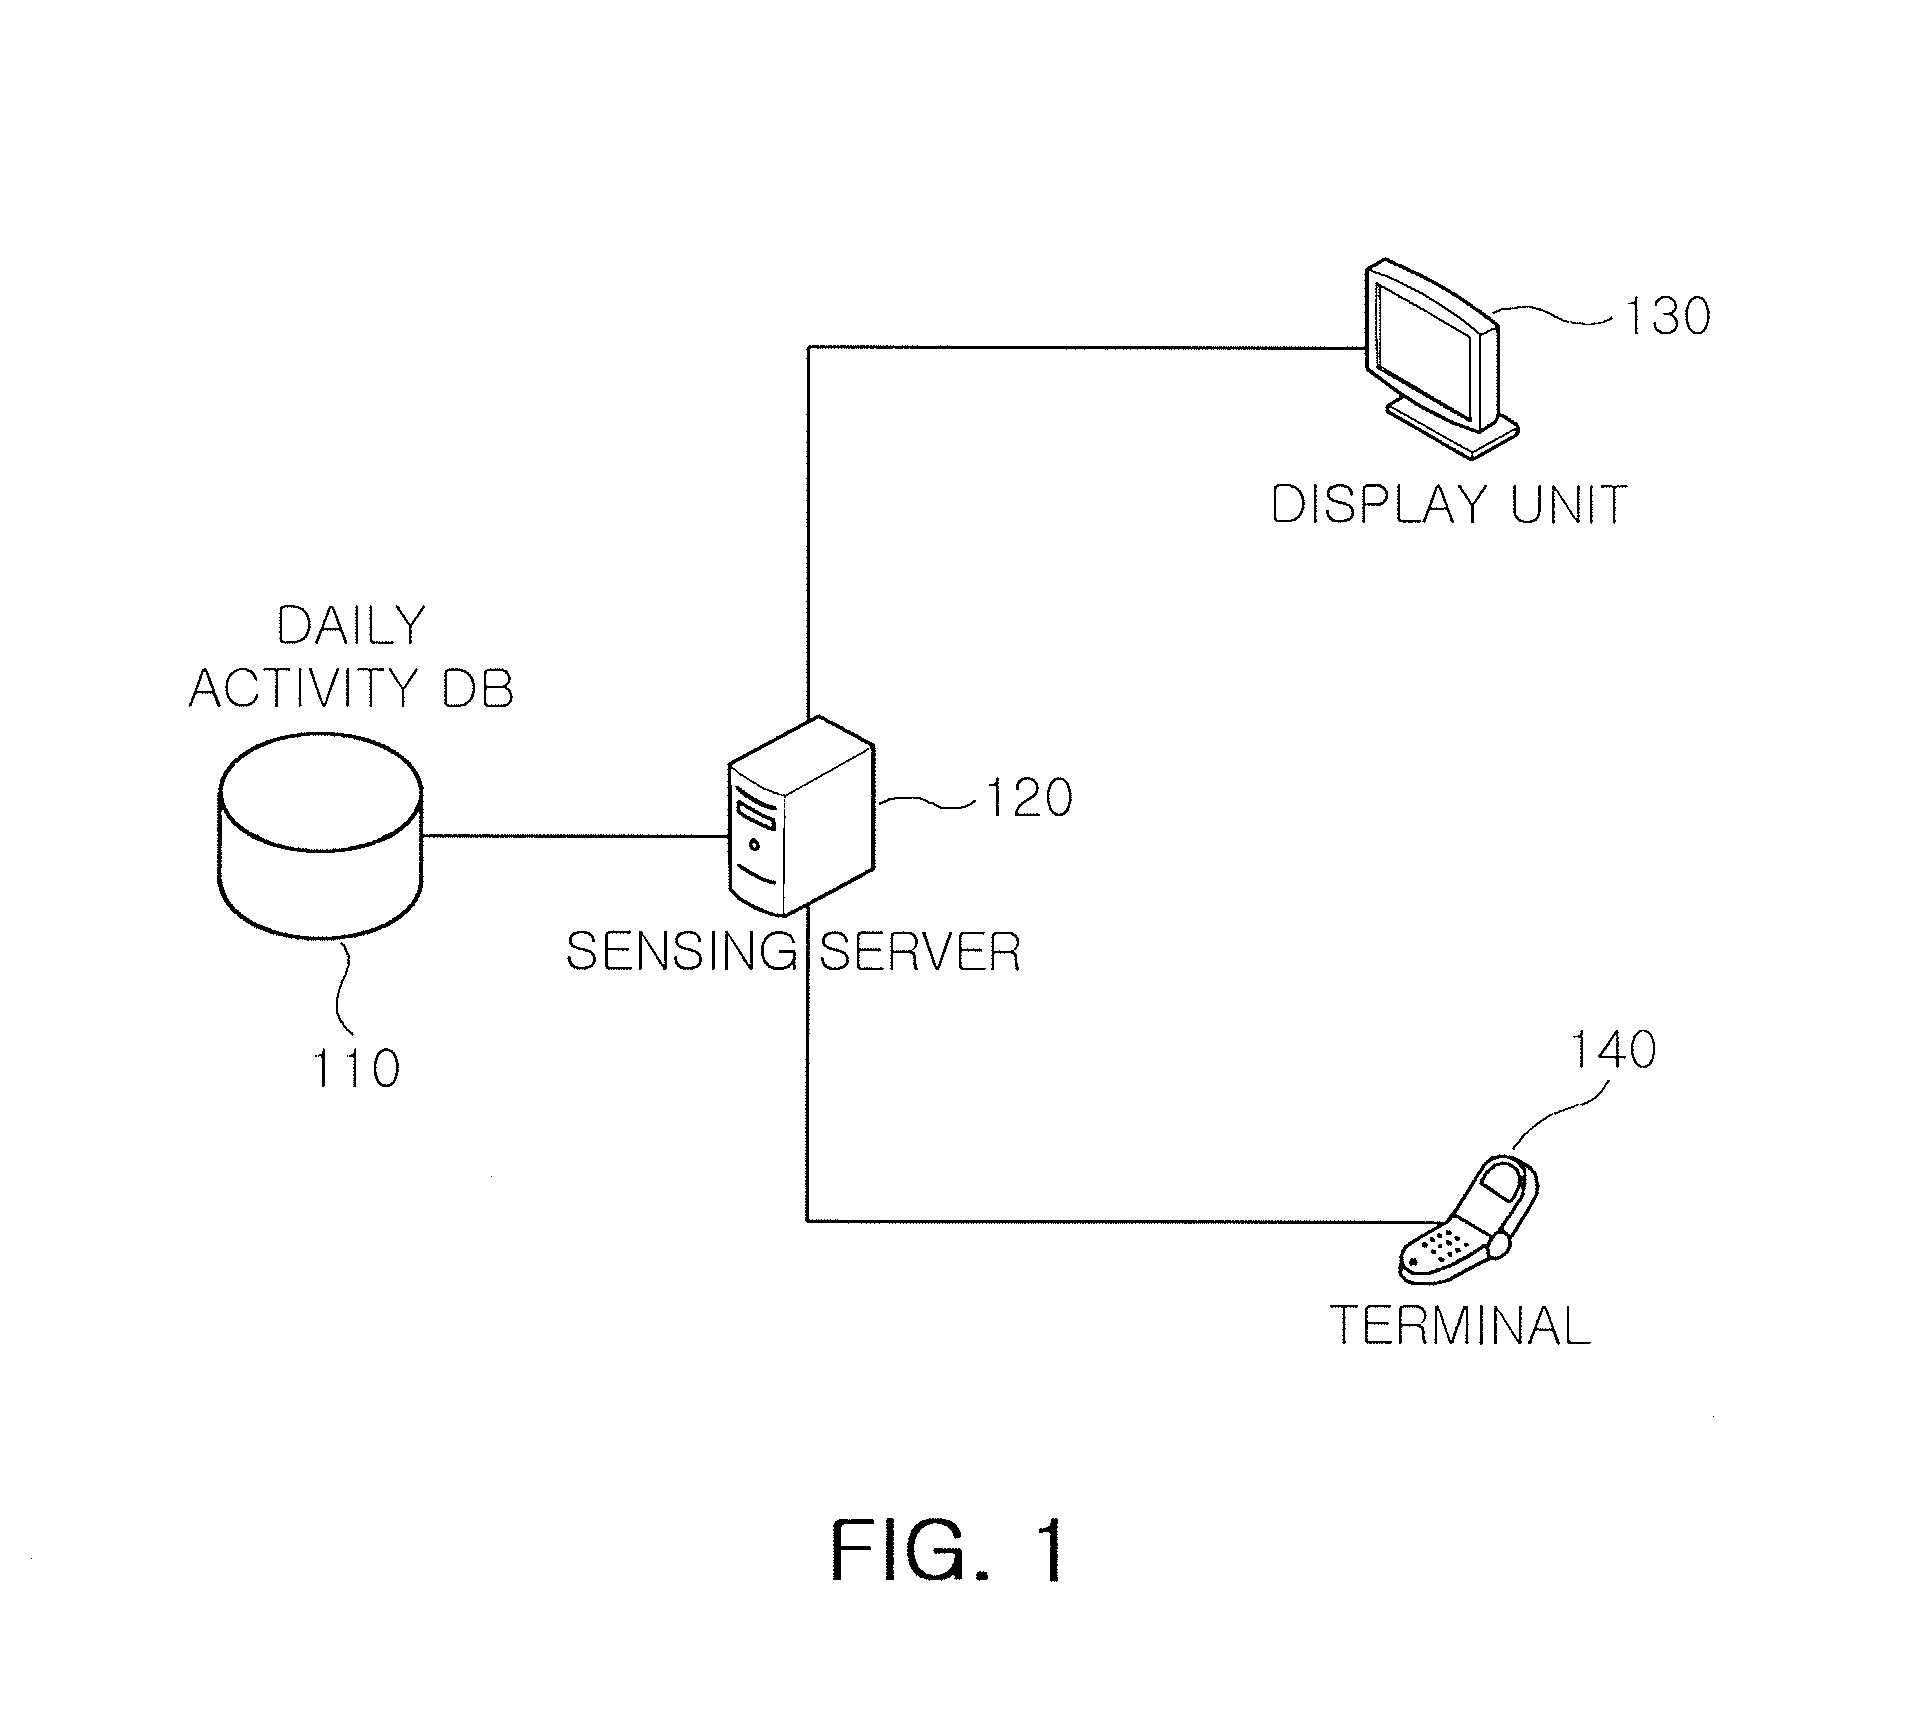 Method and system for sensing abnormal signs in daily activities